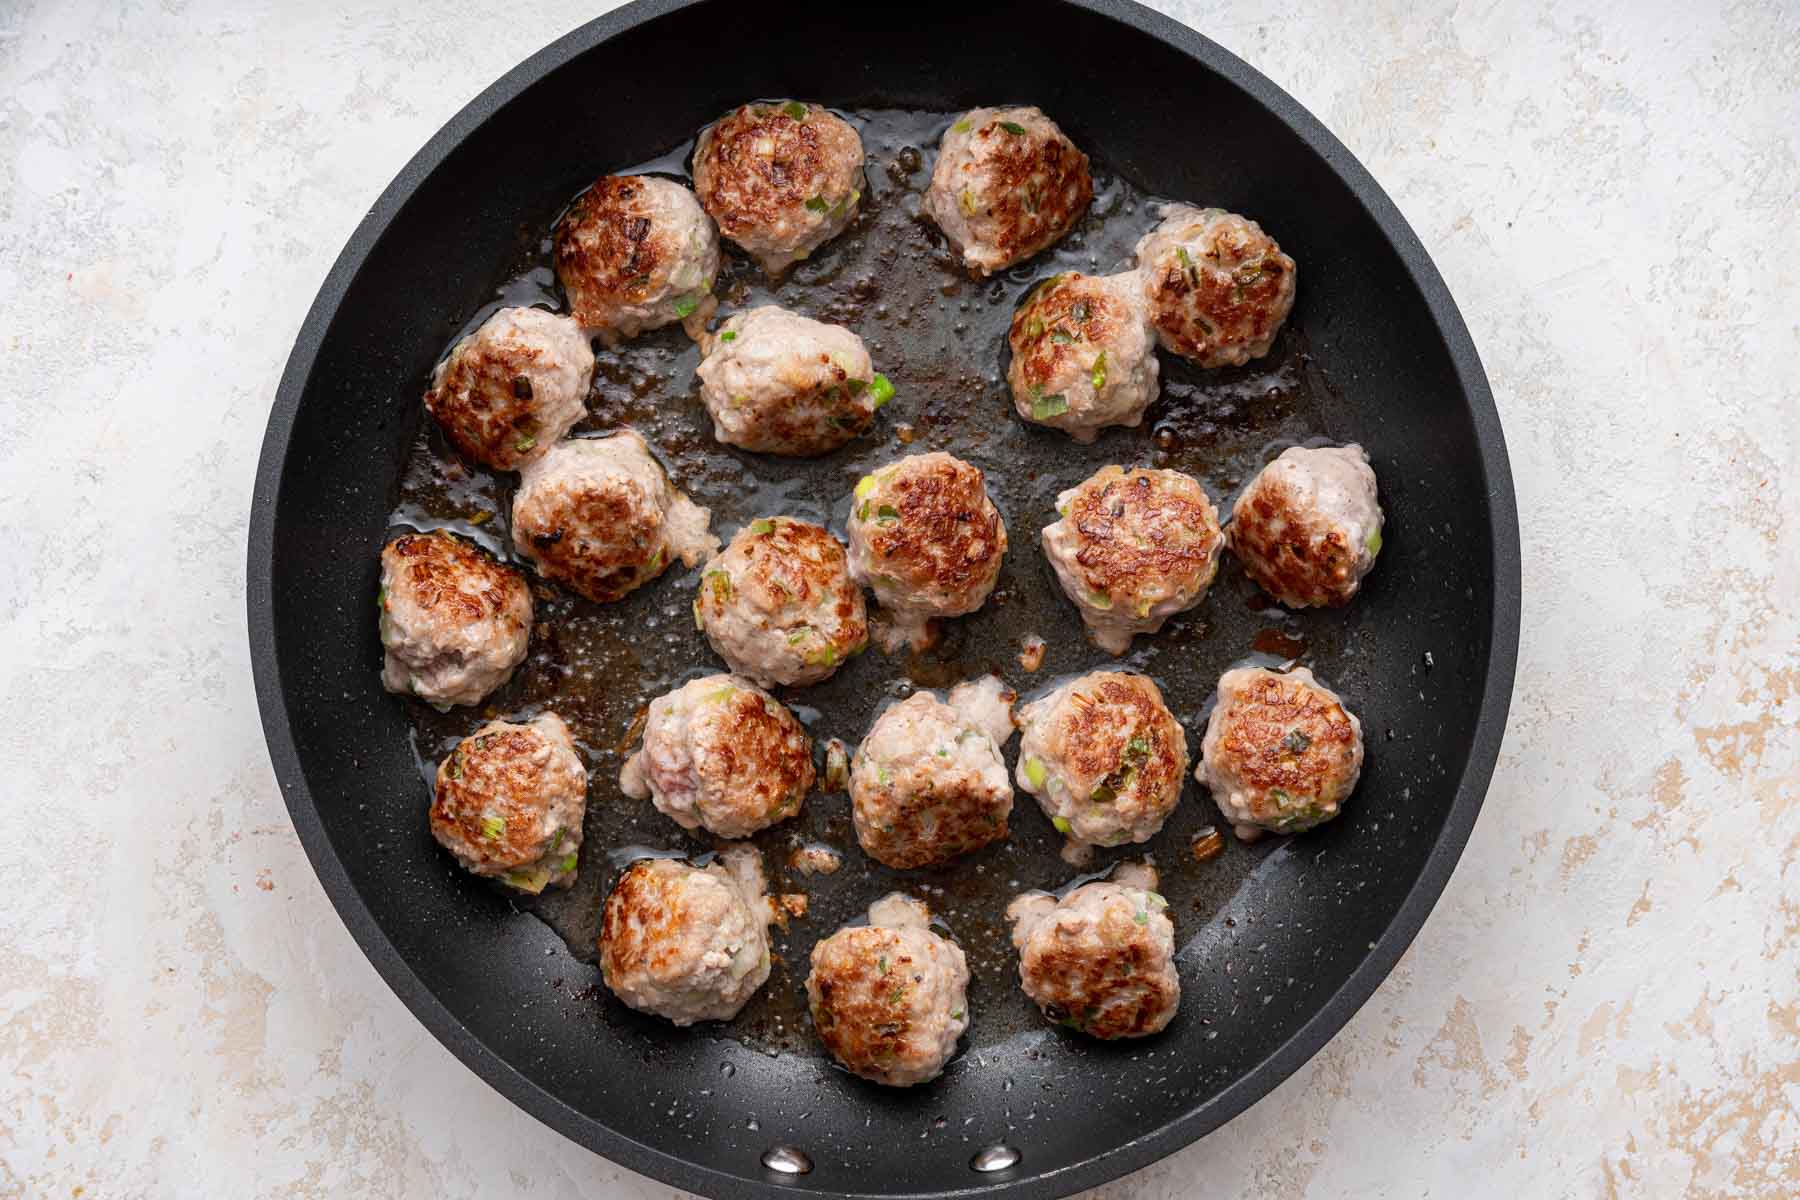 Meatballs browning in a cast iron skillet.